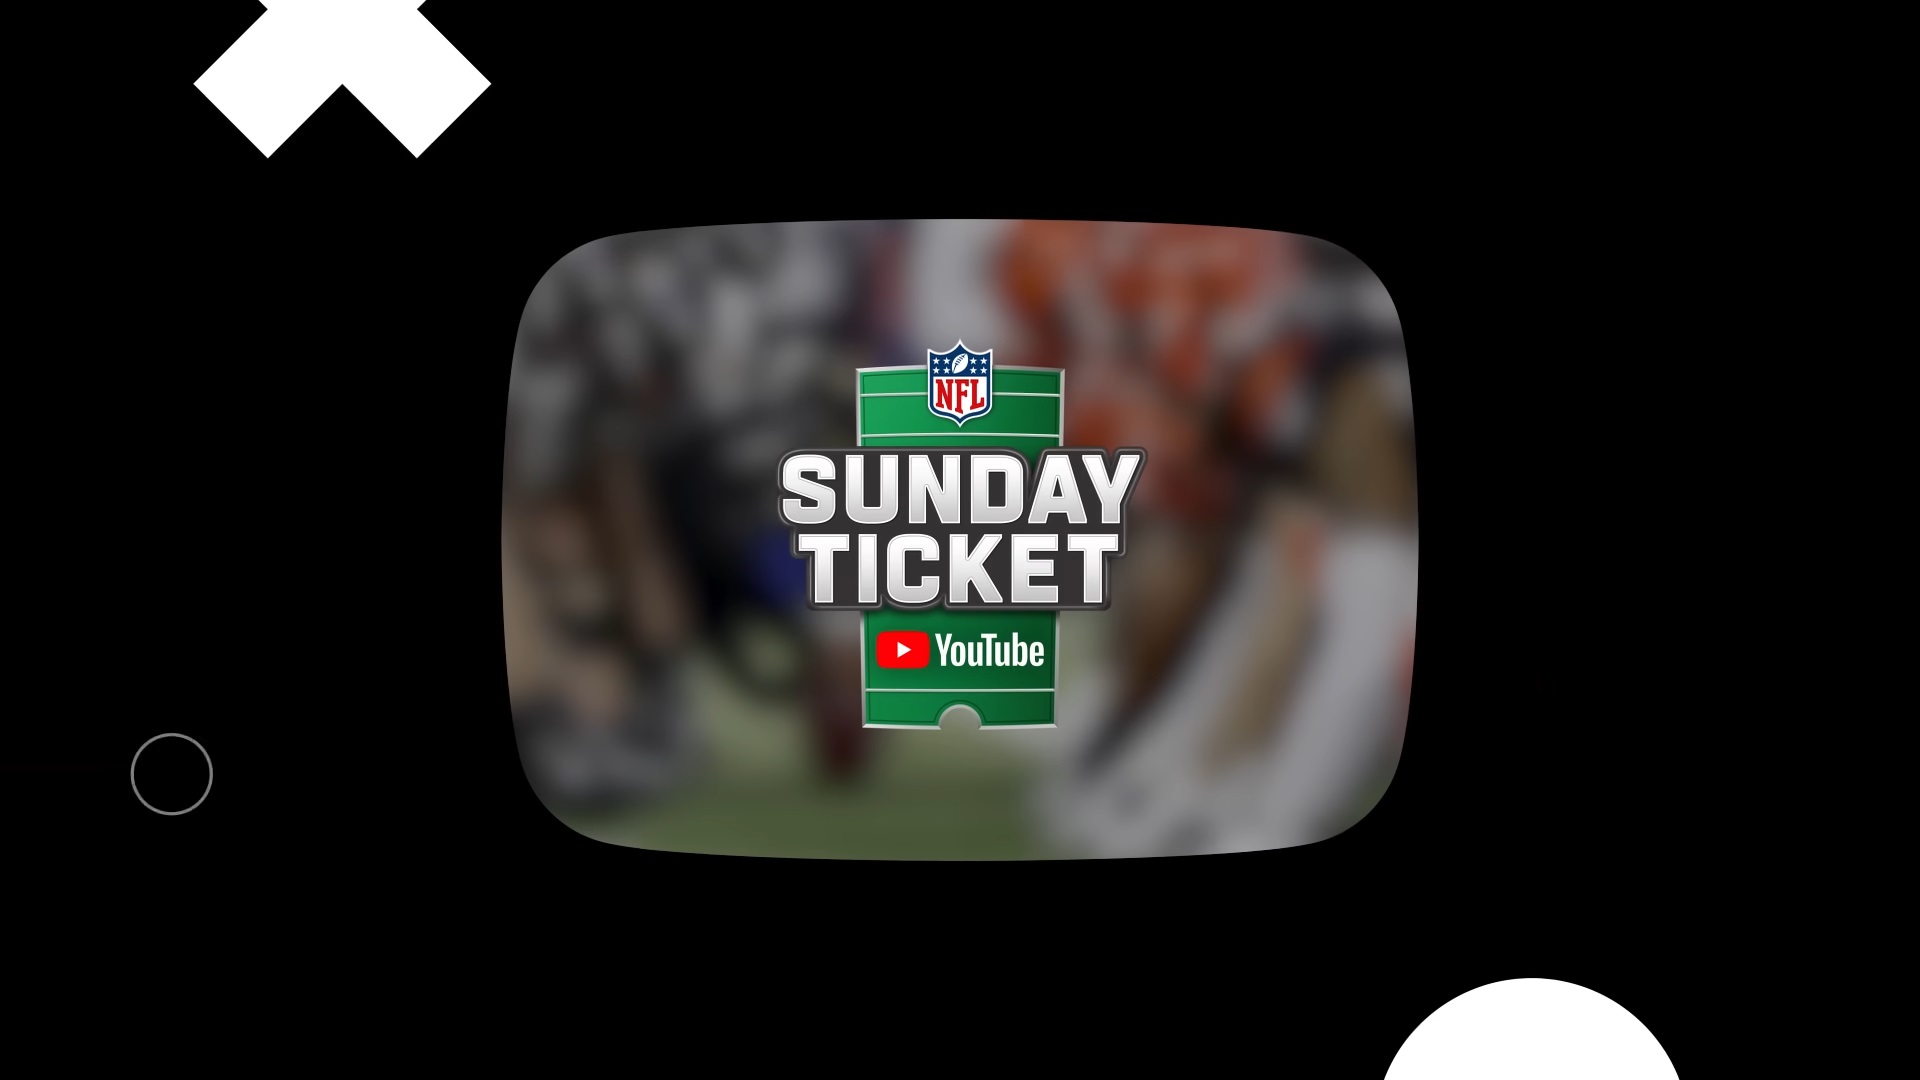 How to sign up for the NFL Sunday Ticket 7-day free trial